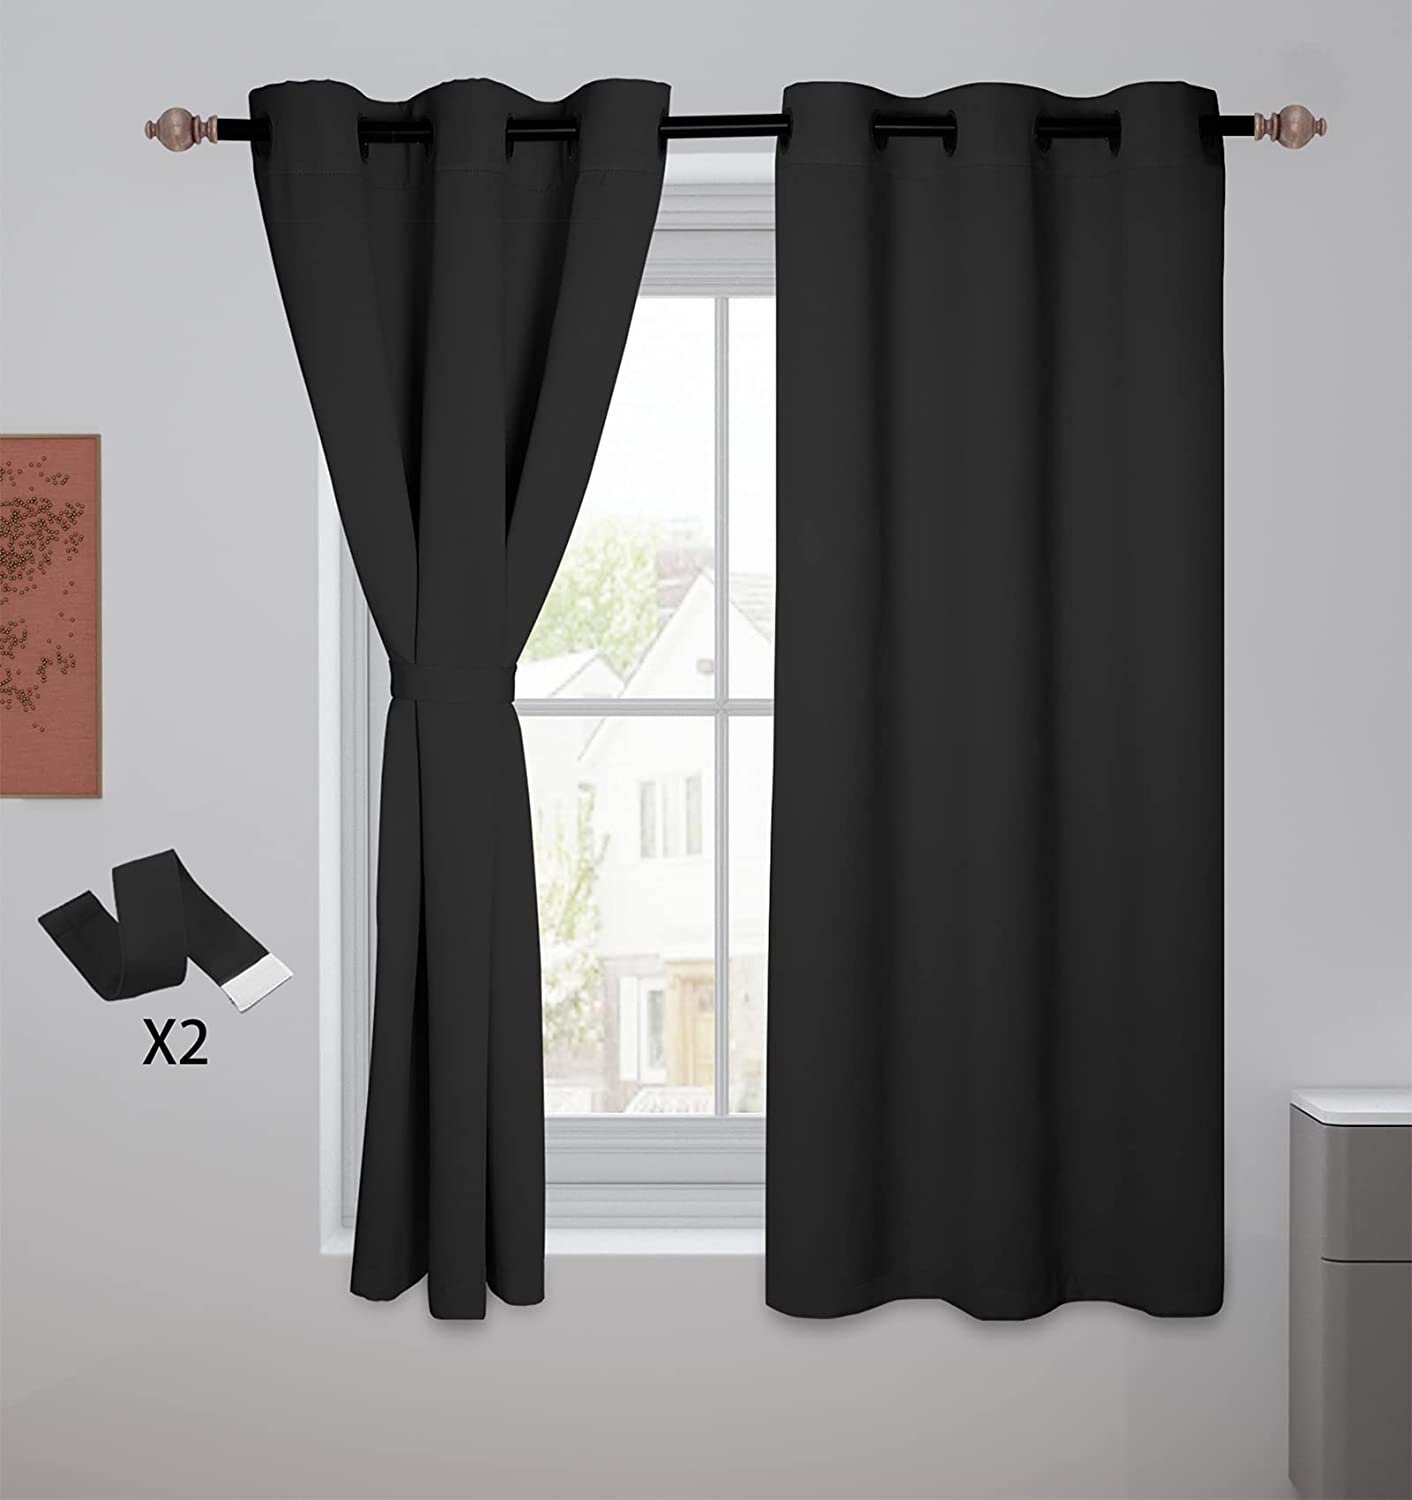 Curtains Blackout Drapes Window Thermal Insulated Grommet for Bedroom 2 Panels 